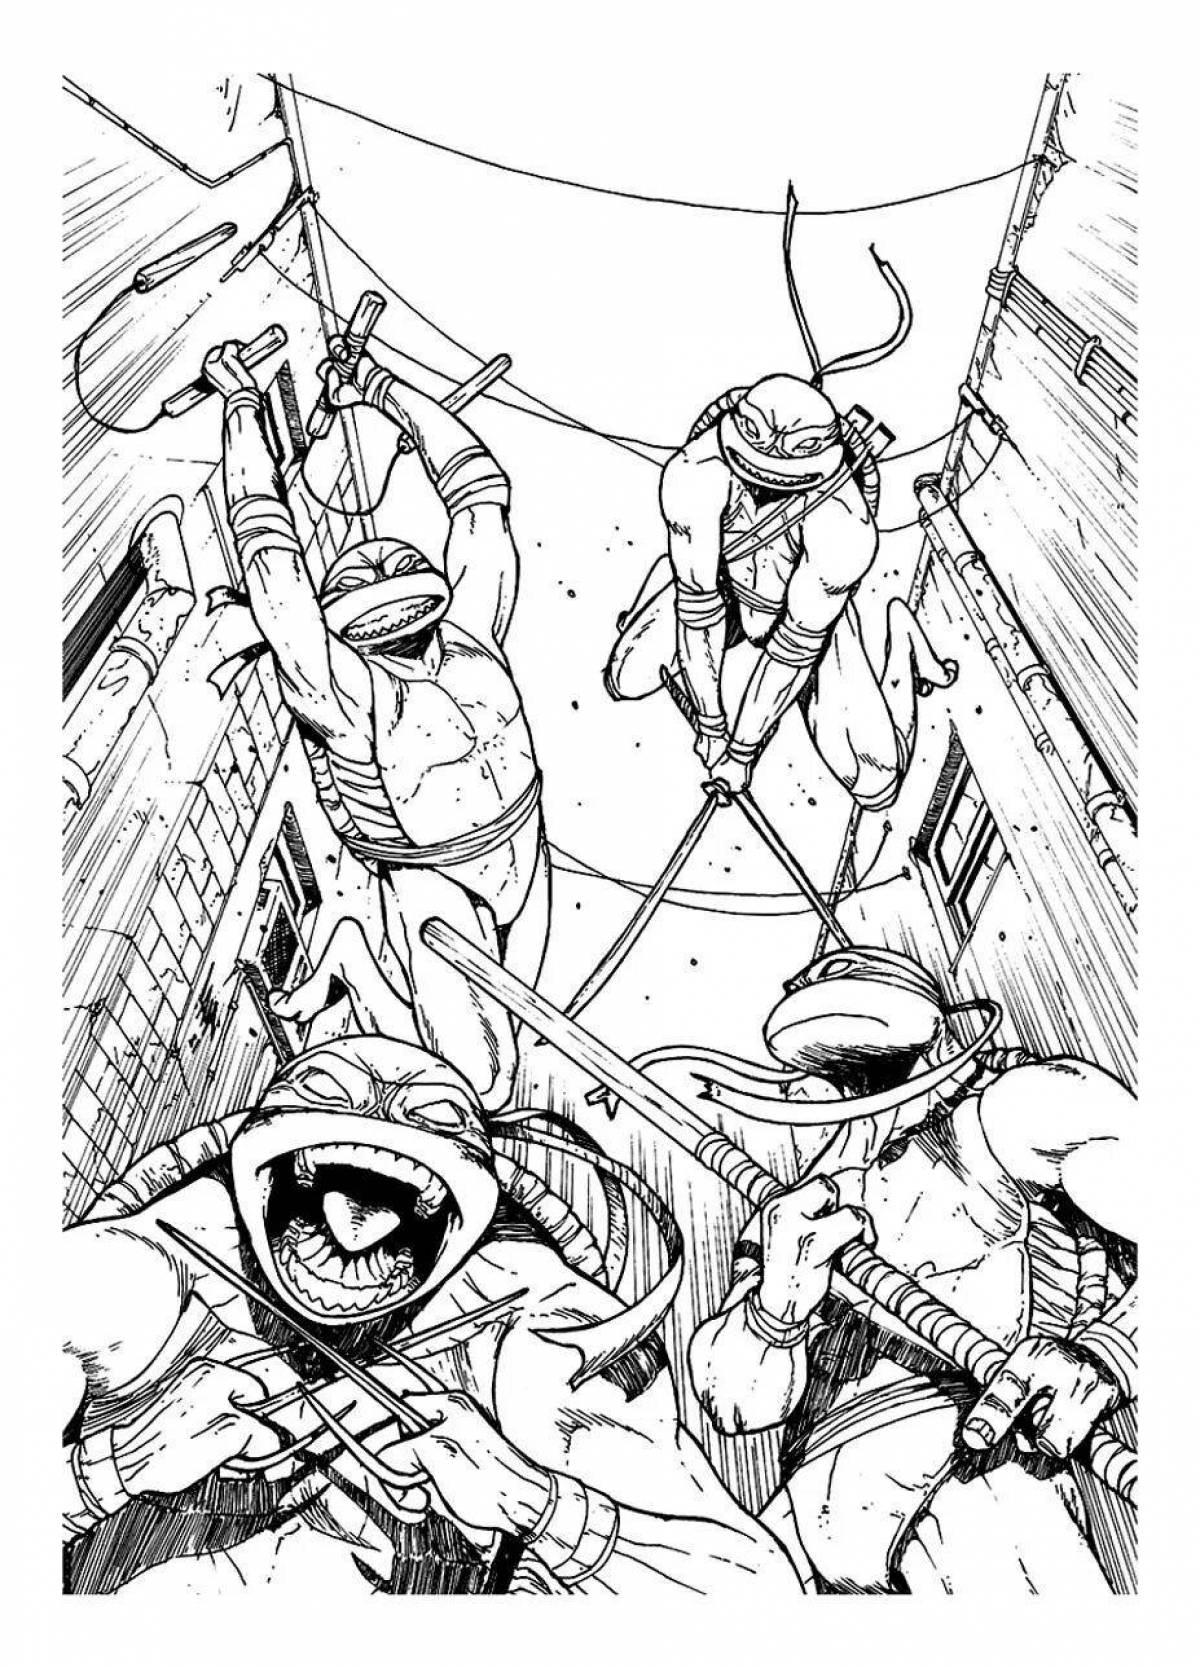 Awesome Teenage Mutant Ninja Turtles from Coloring Book